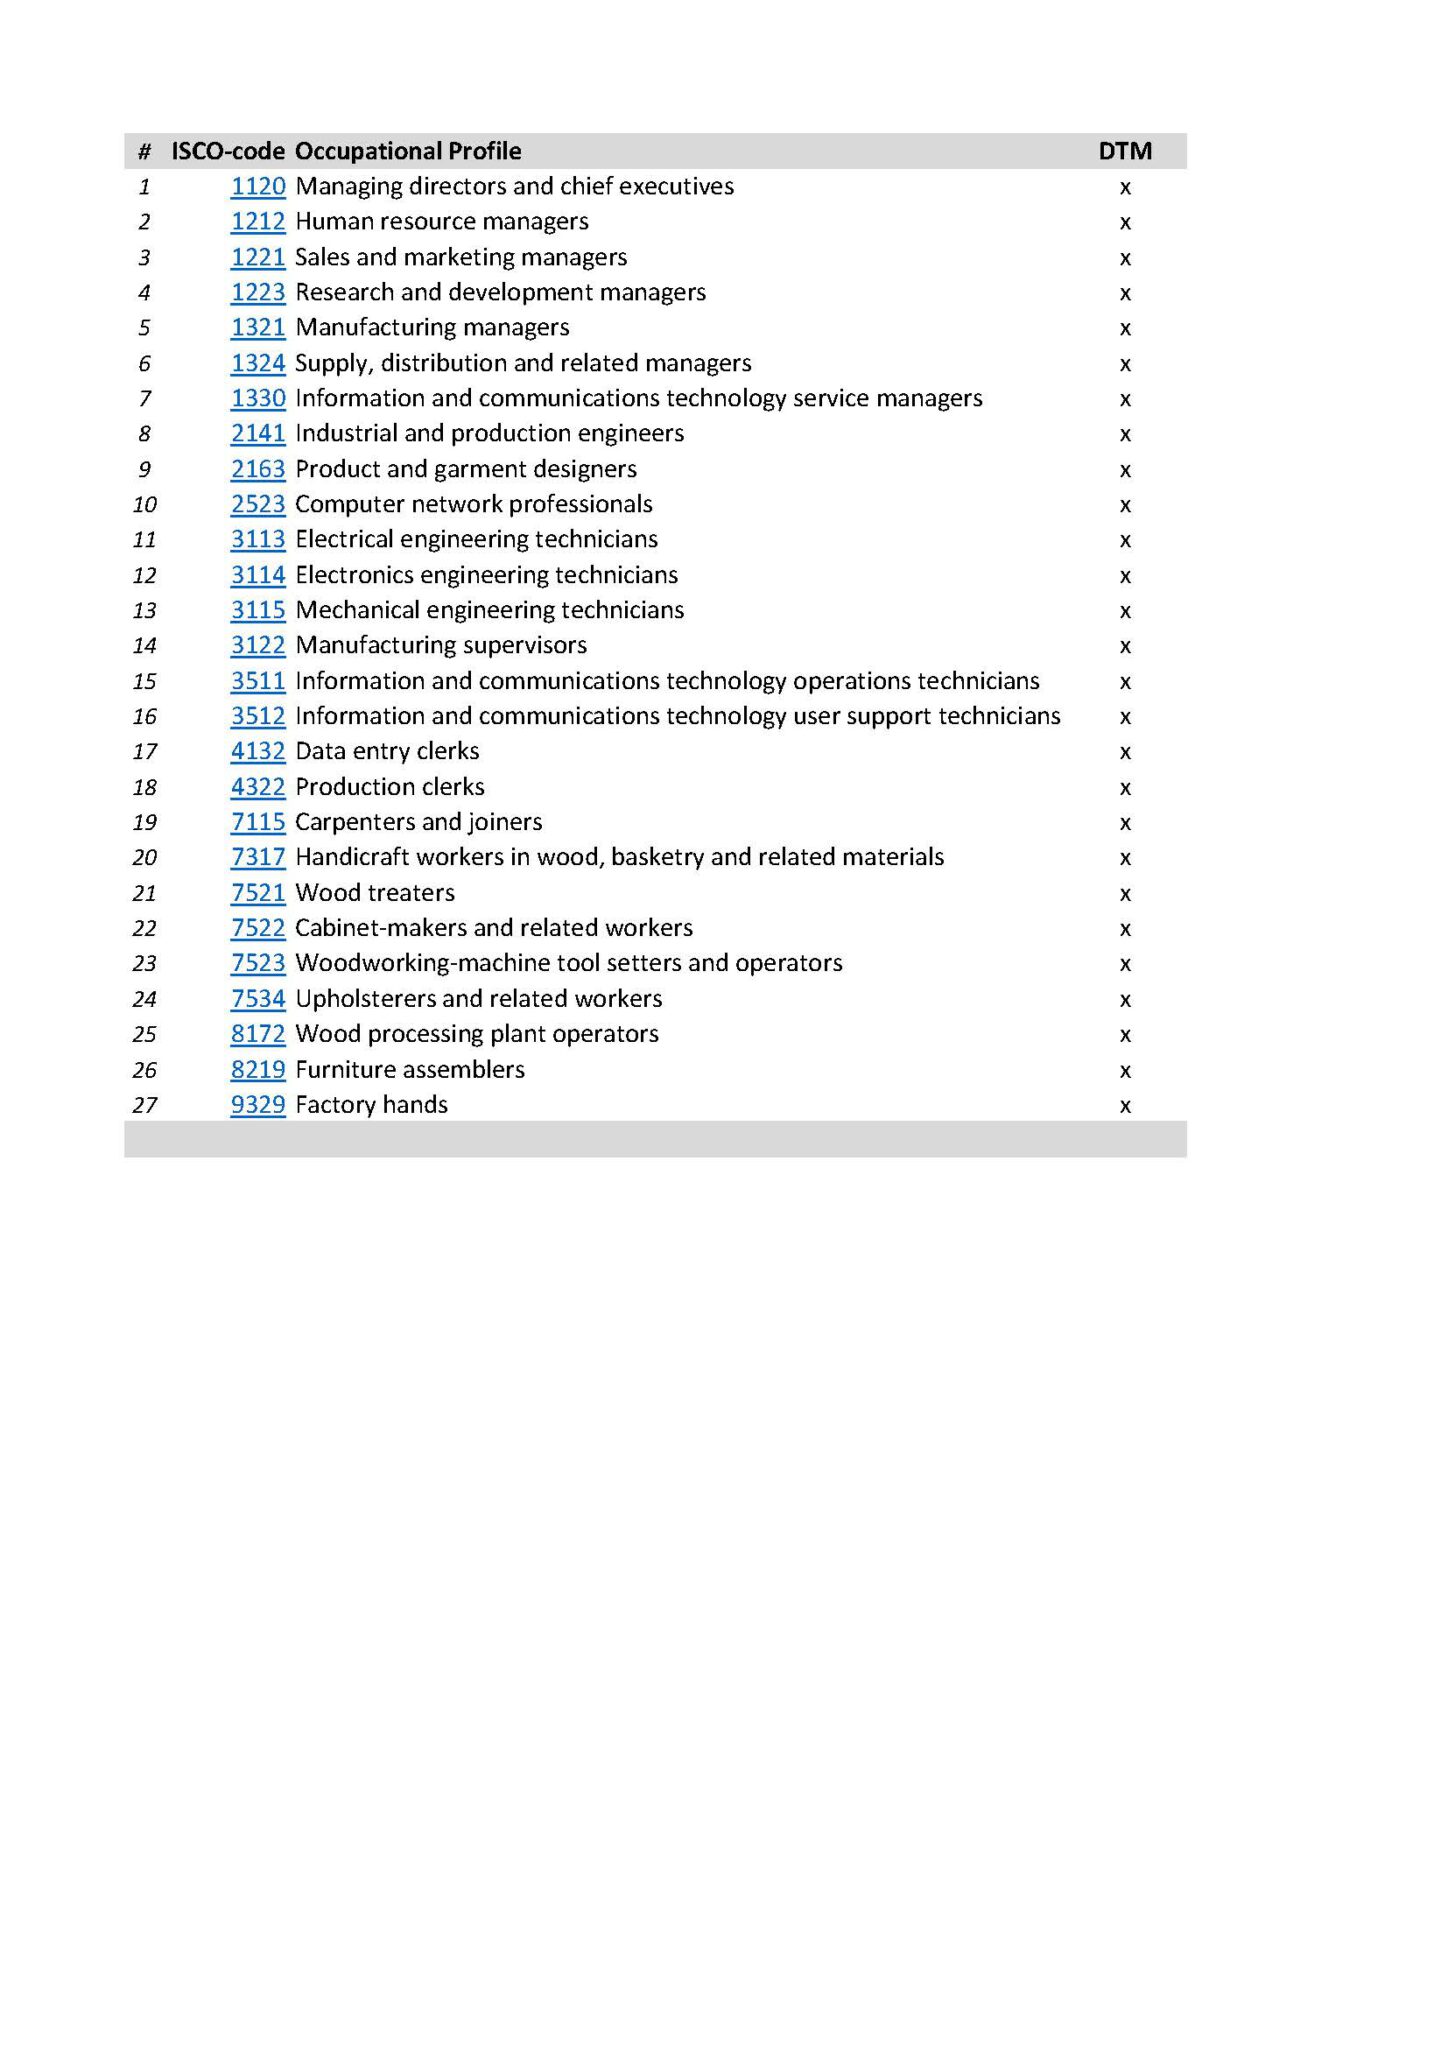 D3.4 – ANNEX ESCO occupations affected by digital transformation